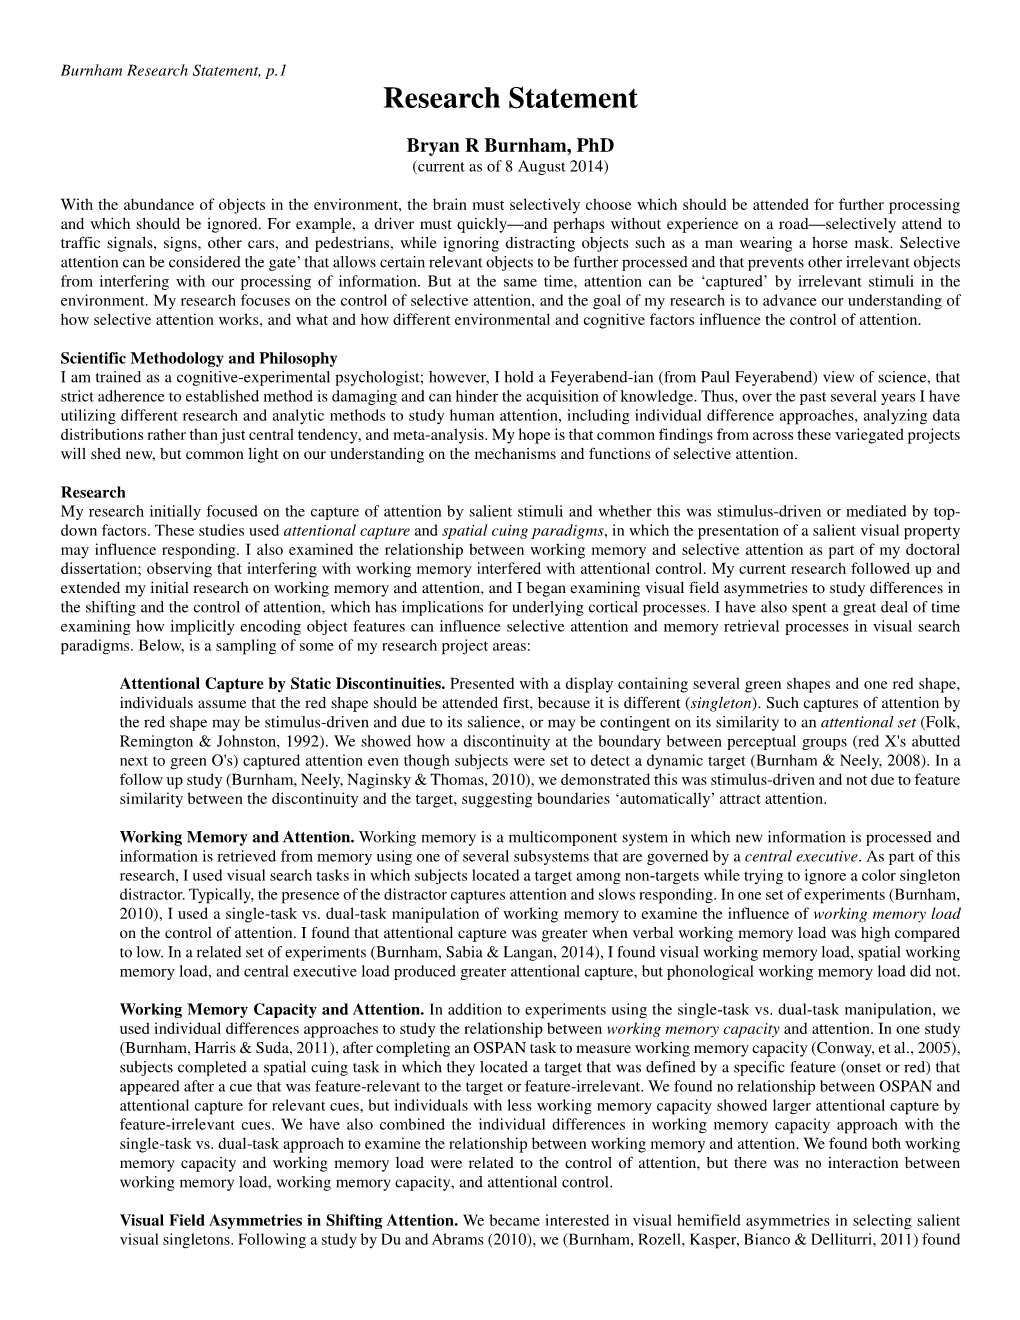 Research Statement, P.1 Research Statement